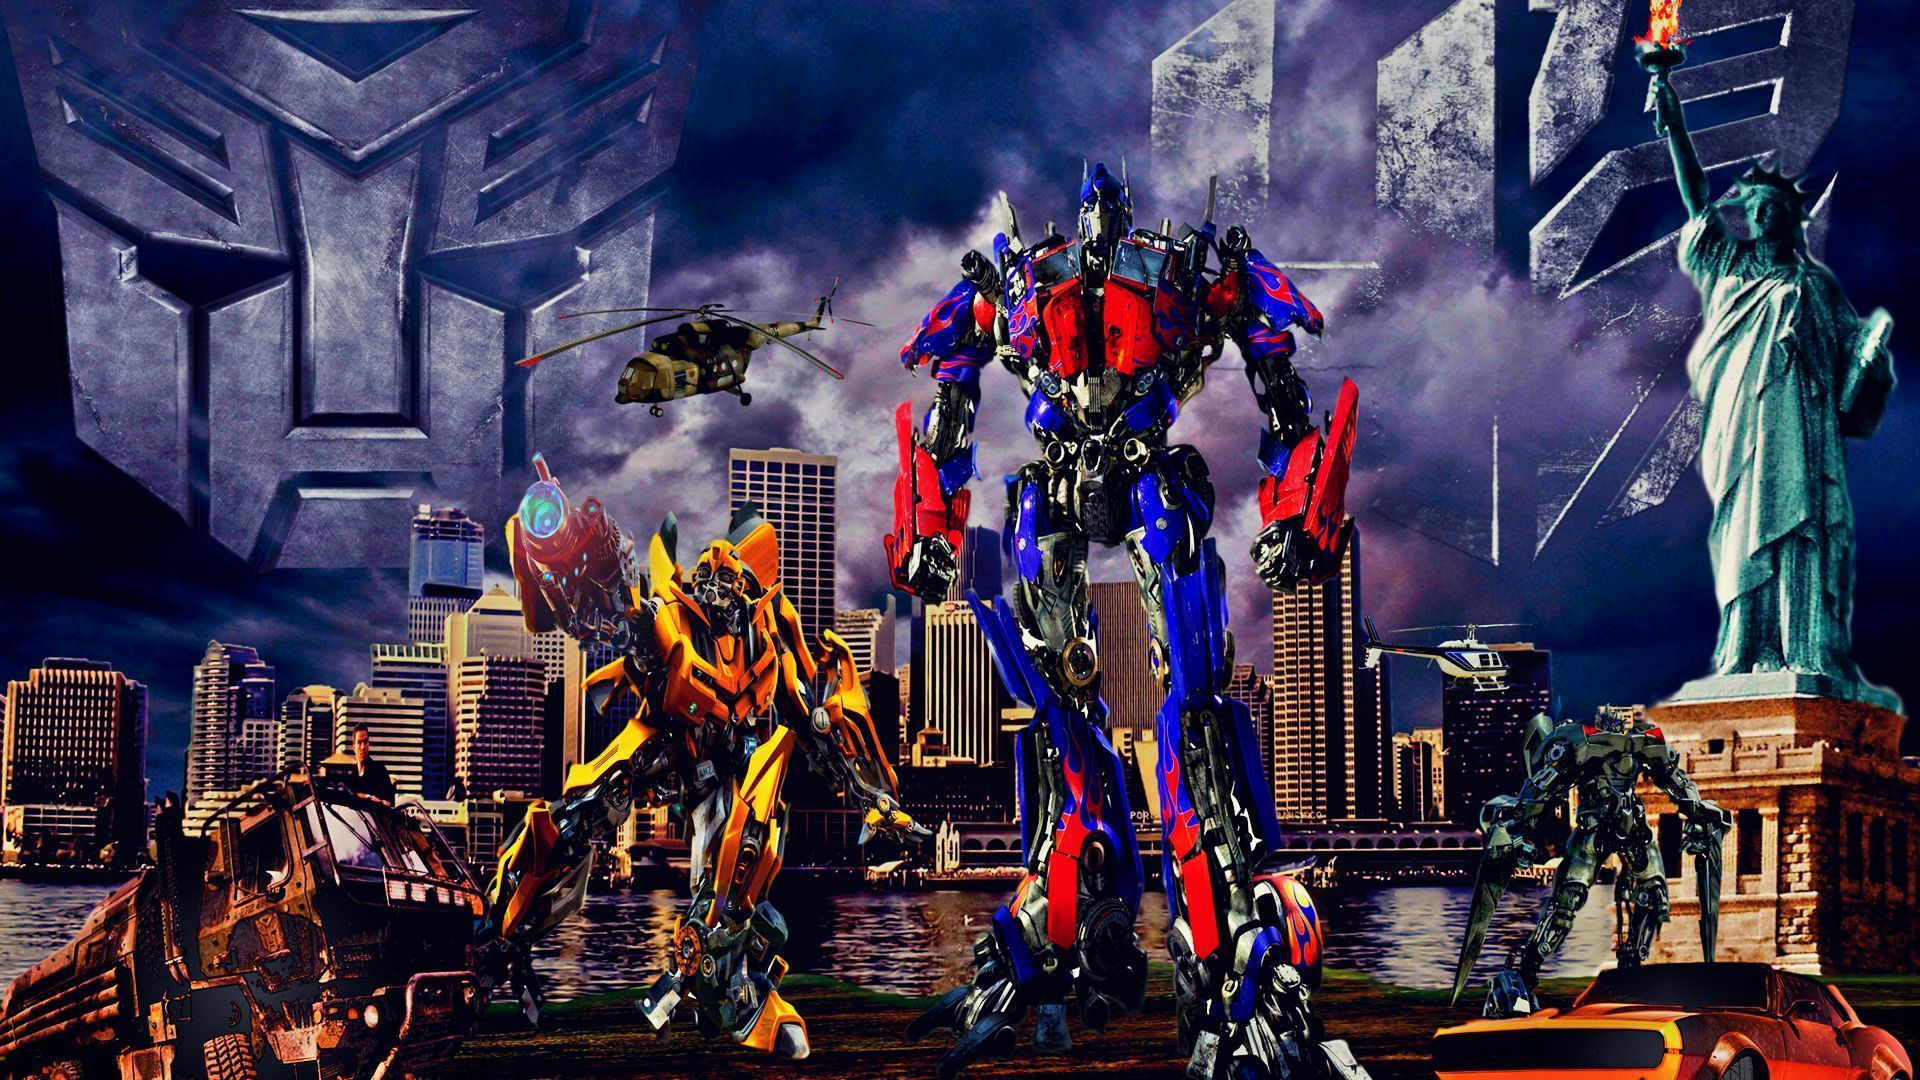 Transformers 4 Age of Extinction Wallpaper HD - Insider Publications